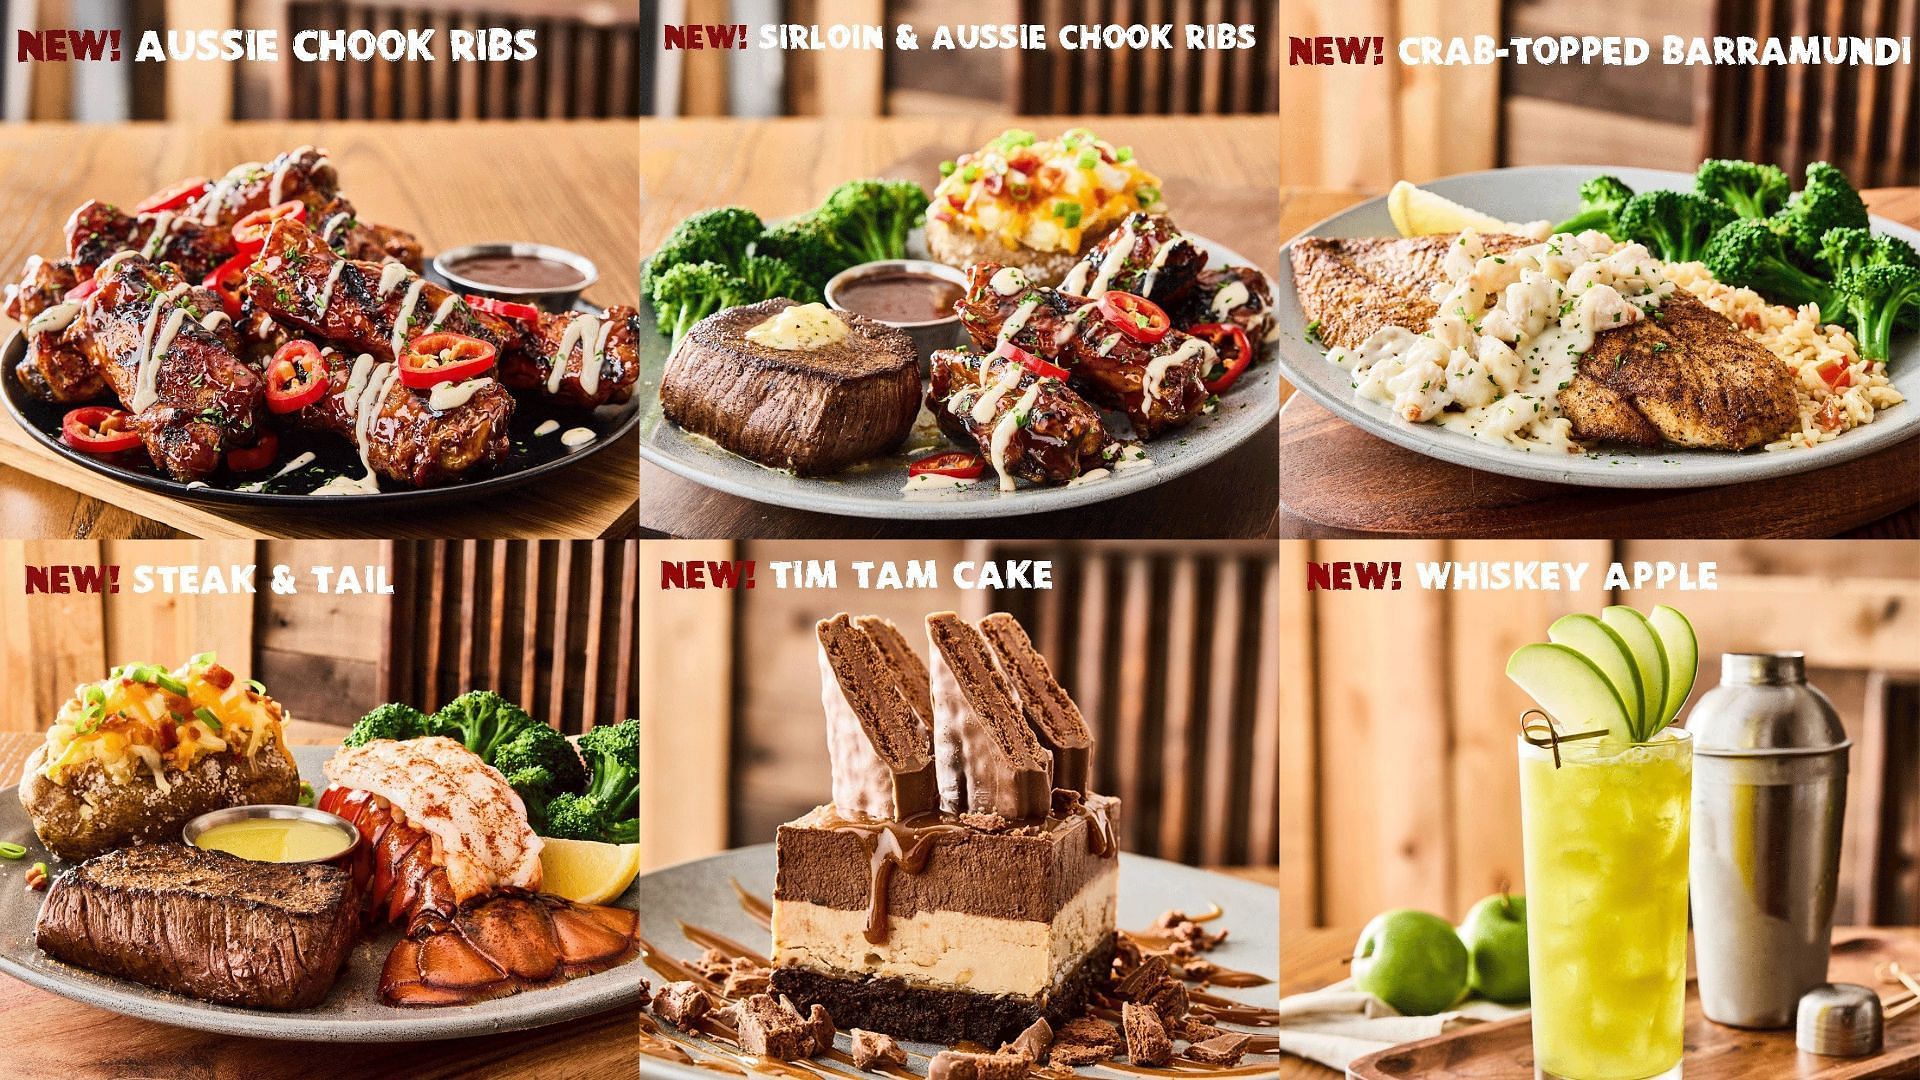 The limited-time Aussie style menu (Image via Outback Steakhouse)